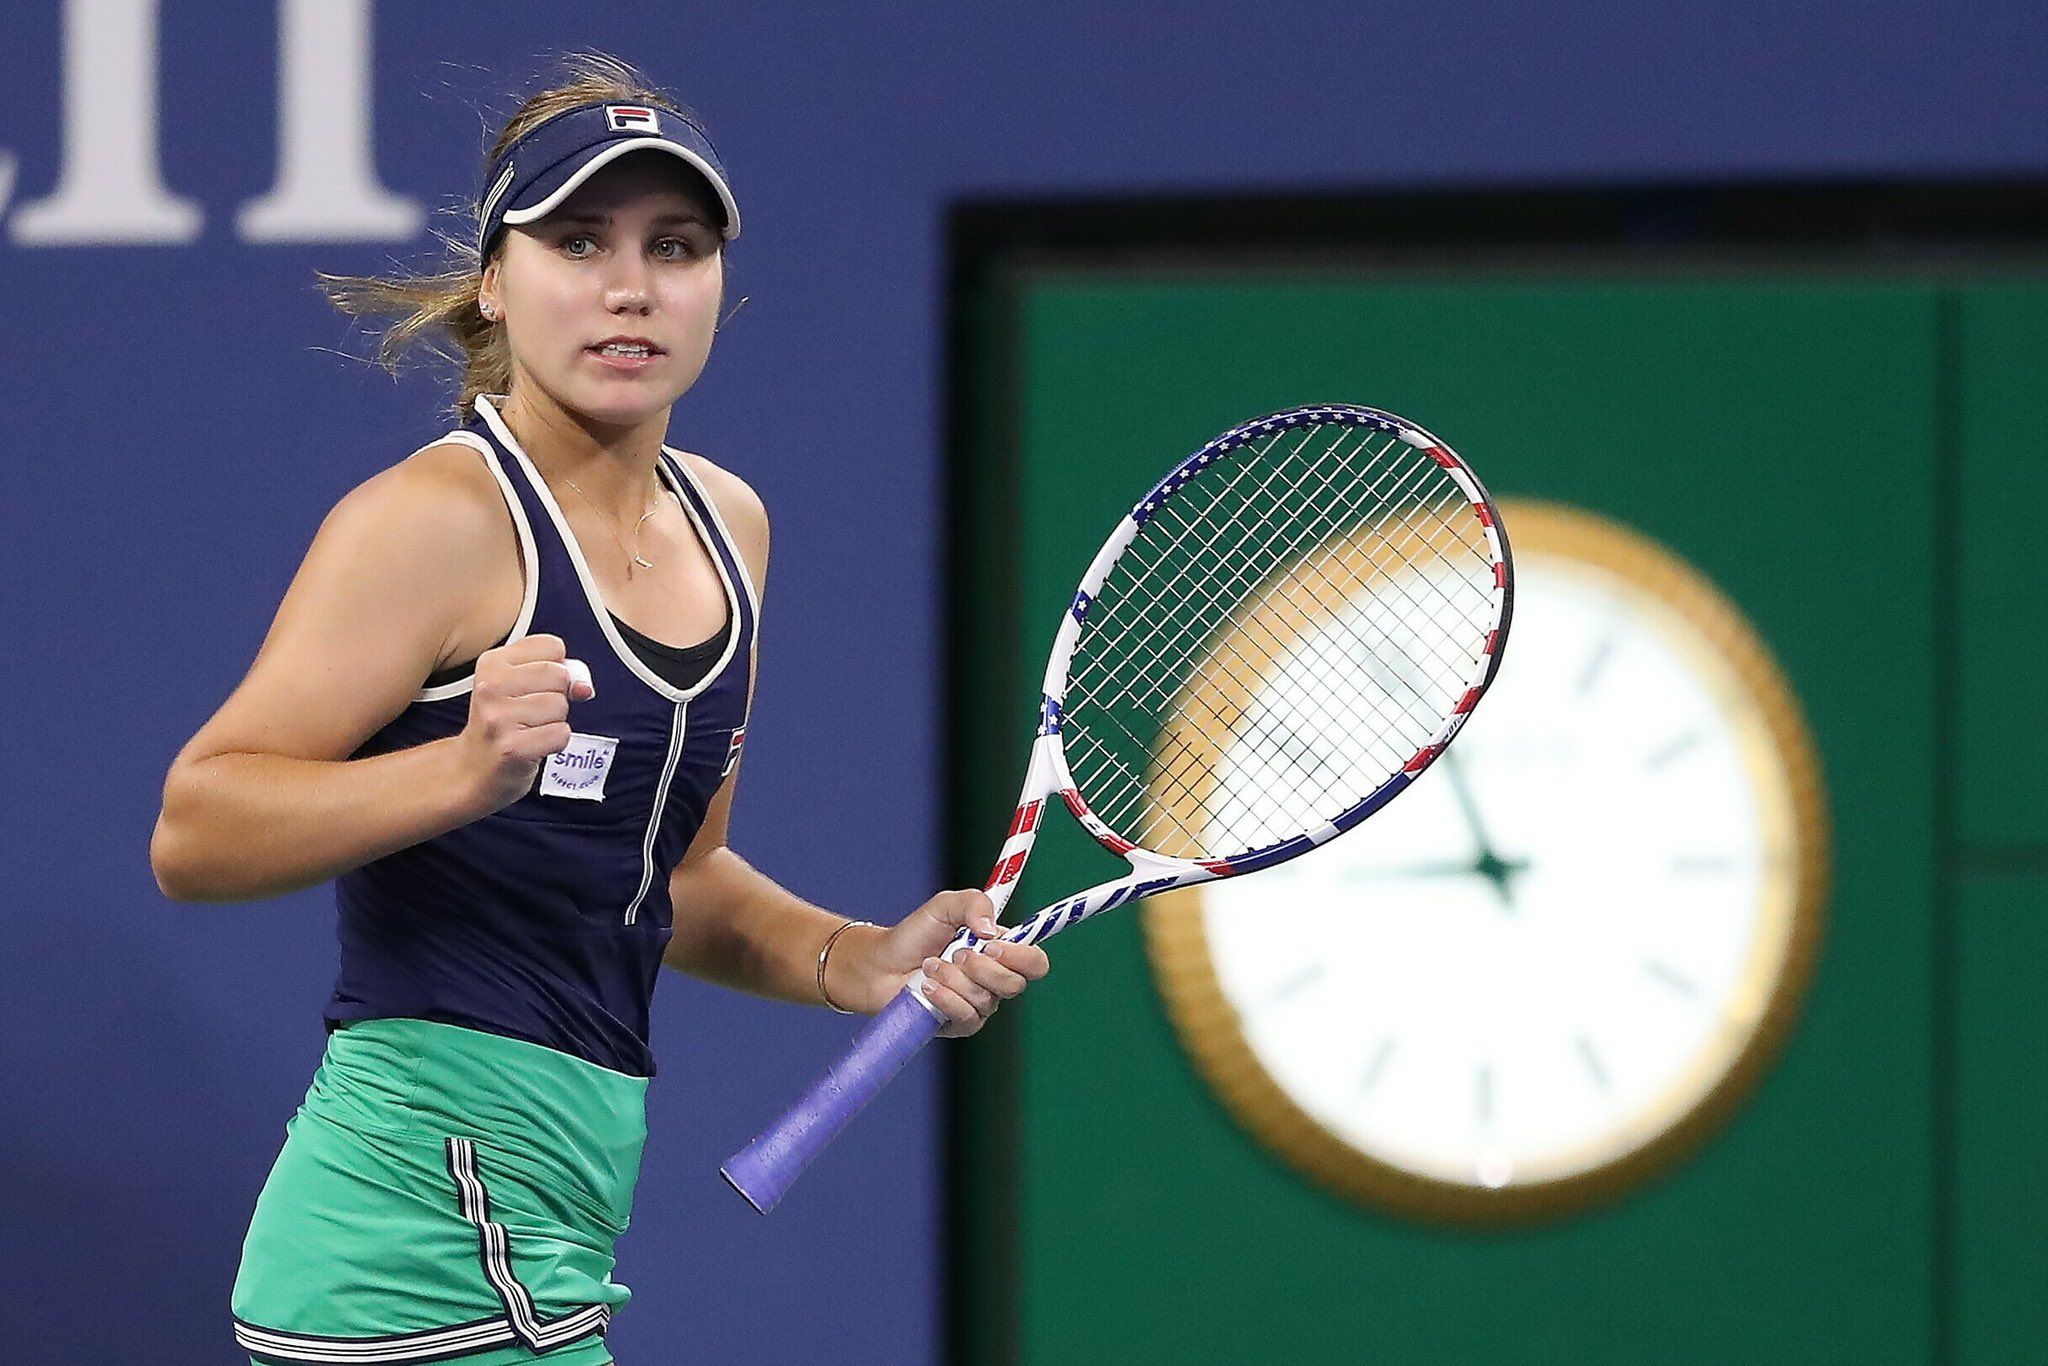 Who is Sofia Kenin, the 2020 runner up eyeing a maiden French Open title